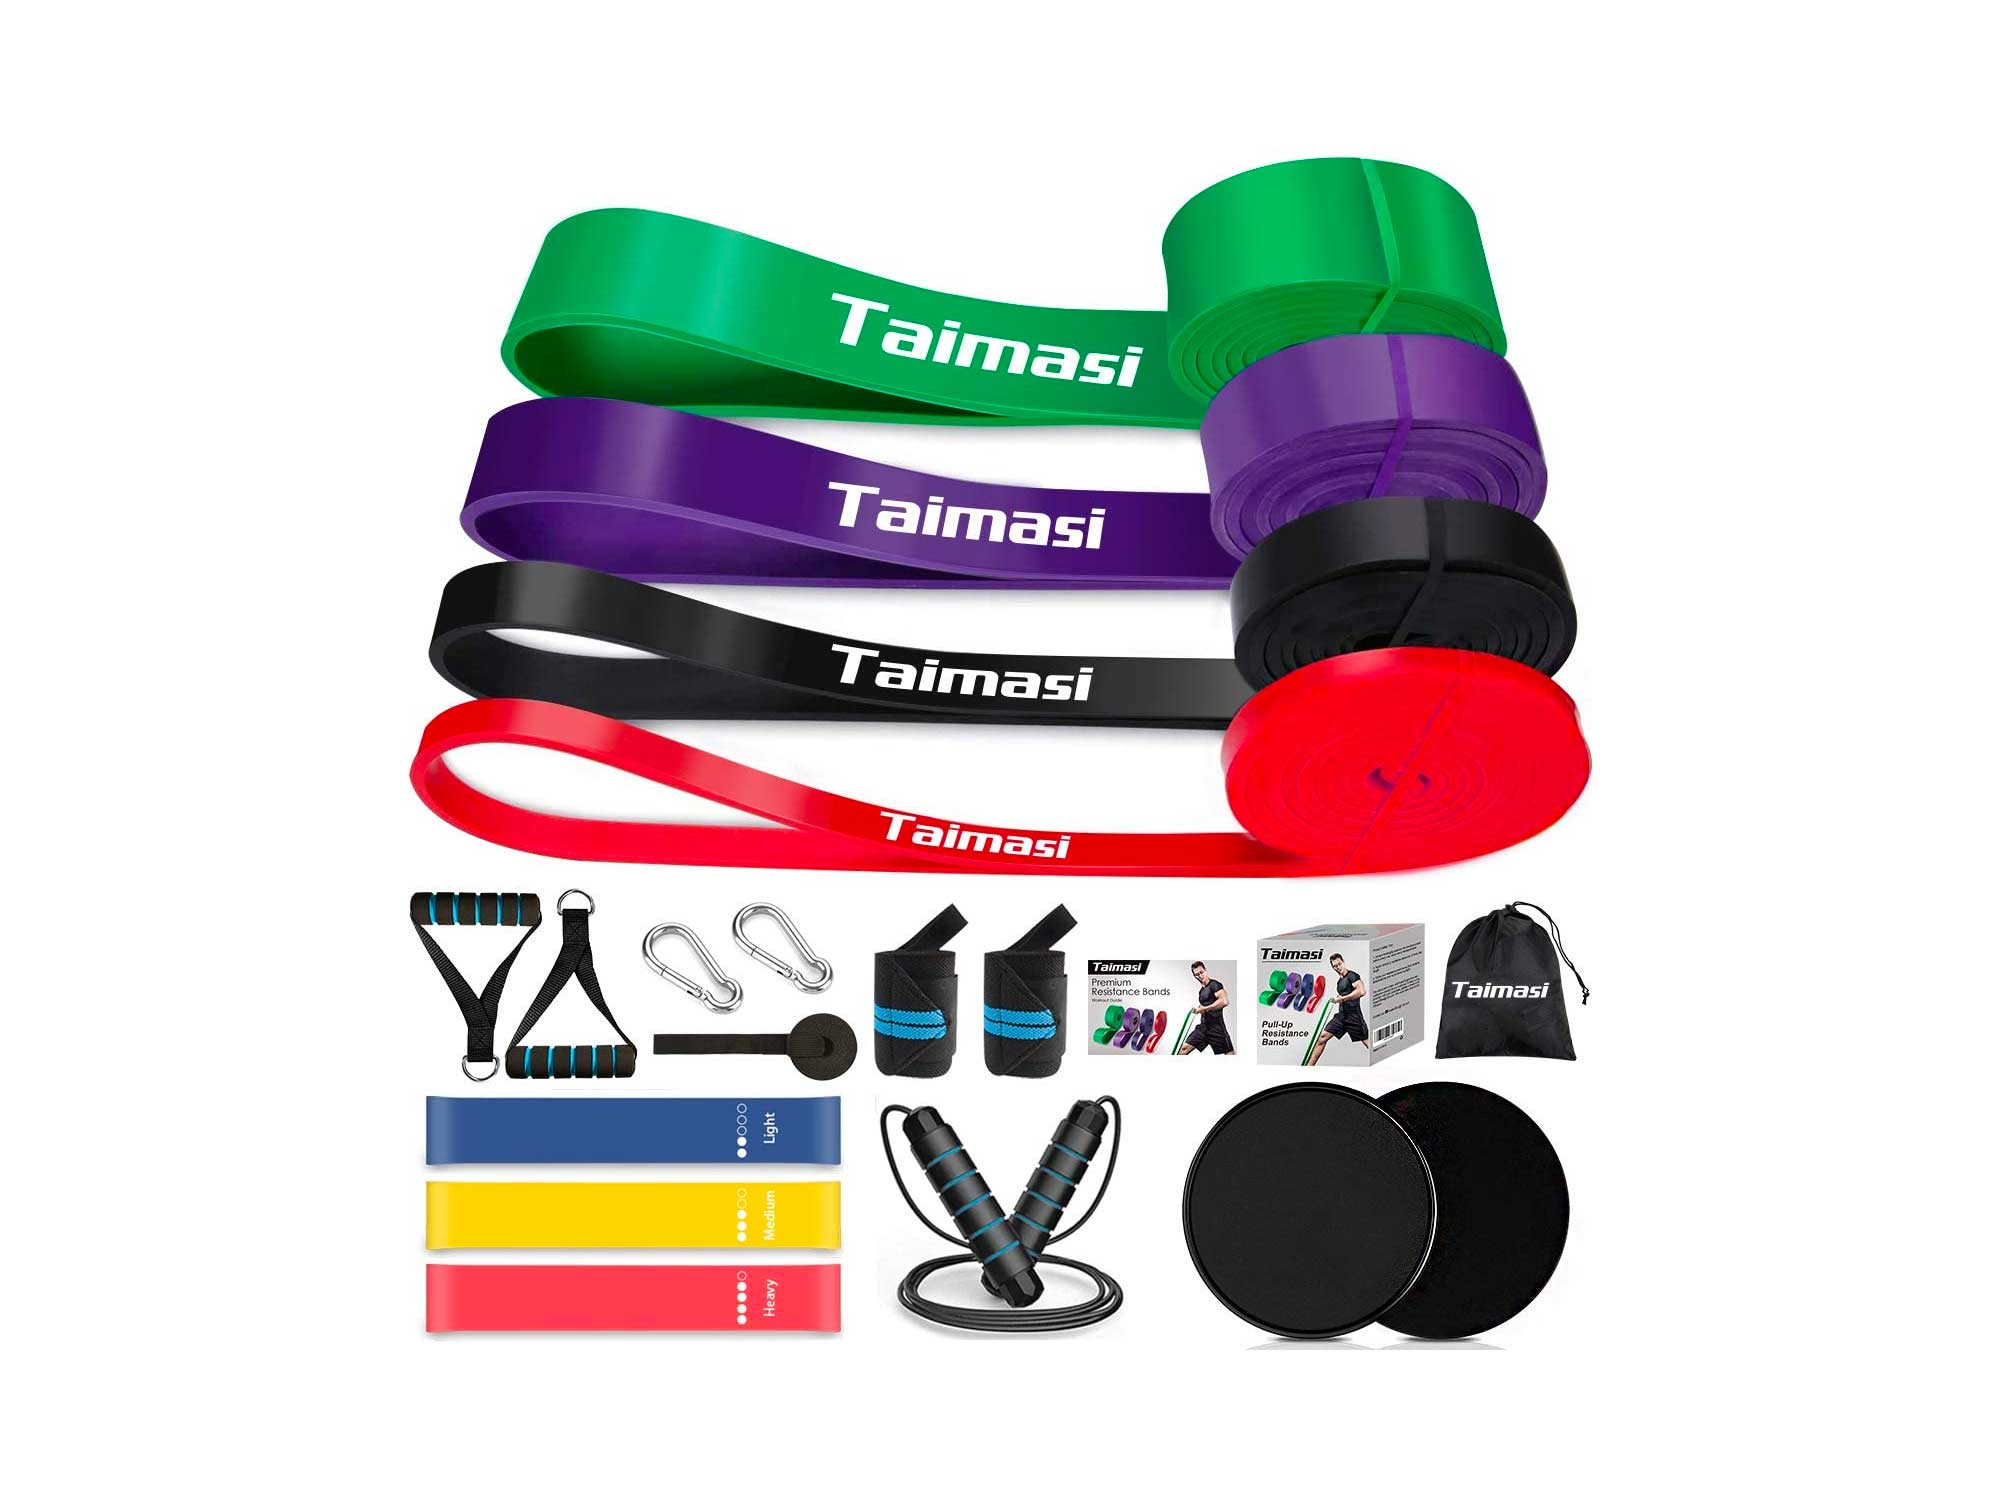 TAIMASI 19PCS Resistance Bands Set Workout Bands - 5 Pull Up Bands, 5 Exercise Resistance Loop Bands, 2 Core Sliders, Jump Rope, Handles, Door Anchor, Wrist Wraps for Body Stretching/Power Training